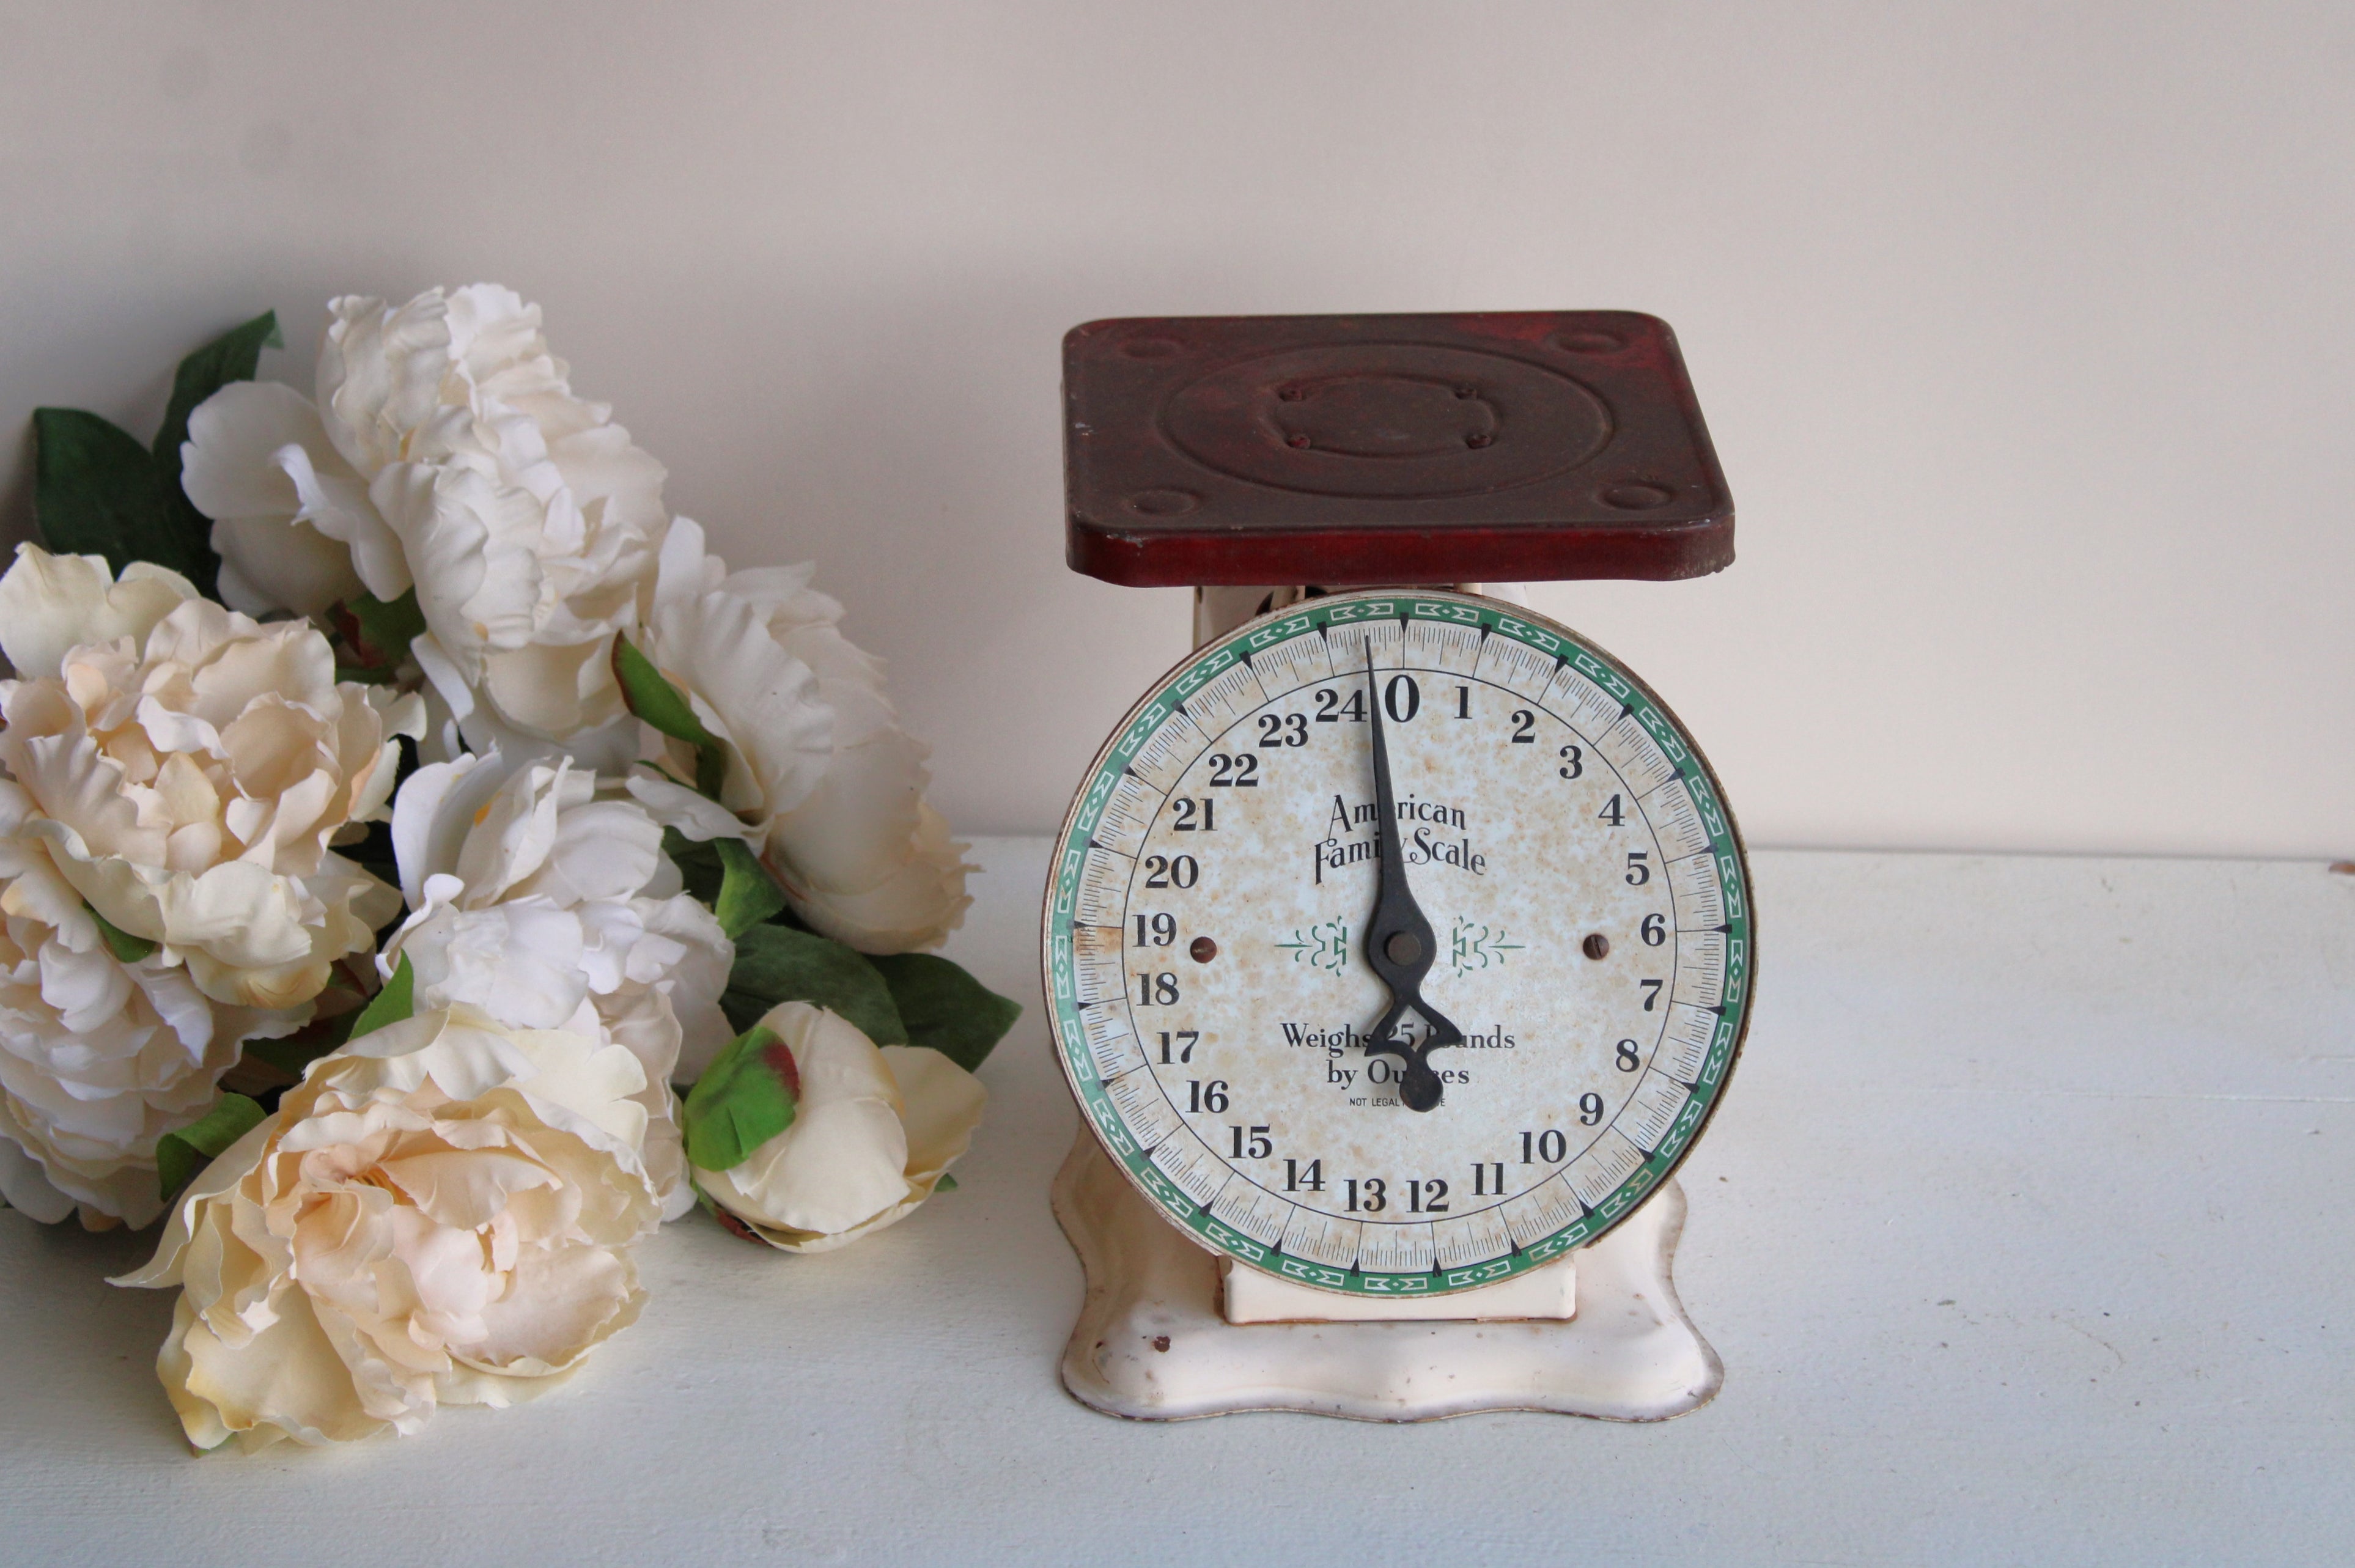 The Adventures Of Tummy: Options on vintage-style kitchen scales